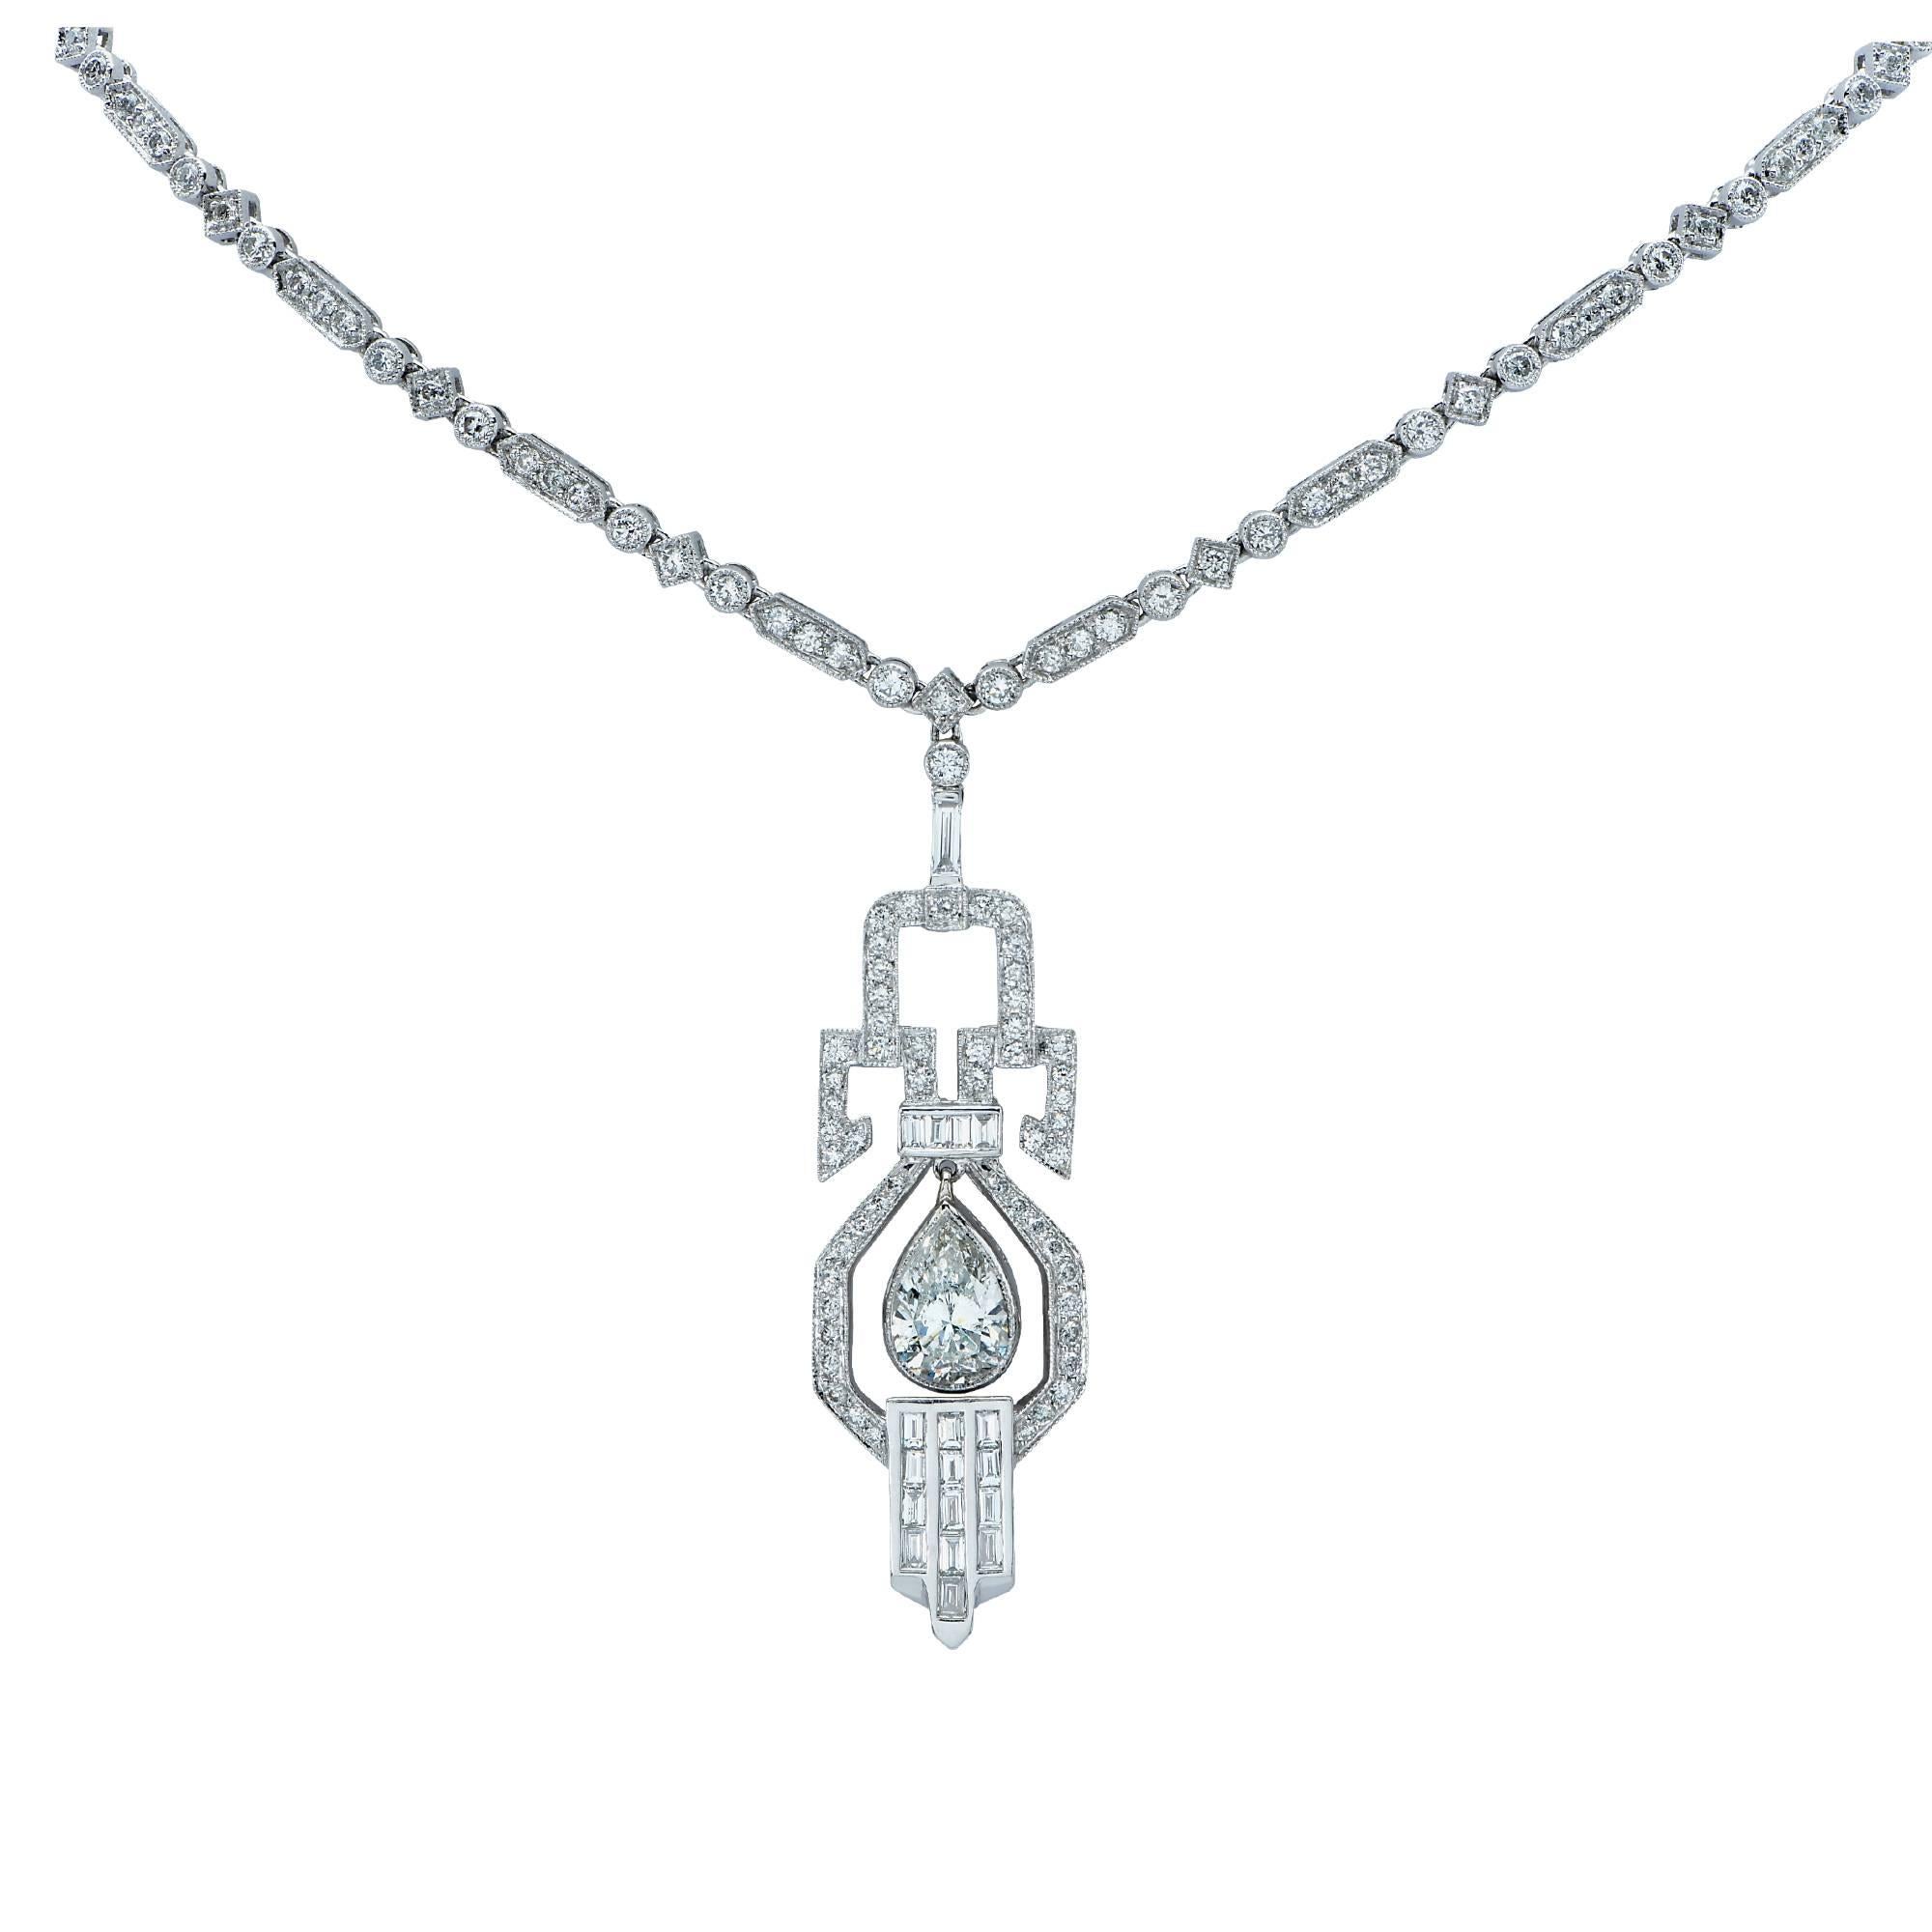 This spectacular necklace crafted in platinum by Sophia D, boasts a brilliant cut pear shape diamond weighing approximately 2cts, I color SI clarity, accented by 218 round brilliant cut and baguette cut diamonds weighing approximately 4.5cts total,